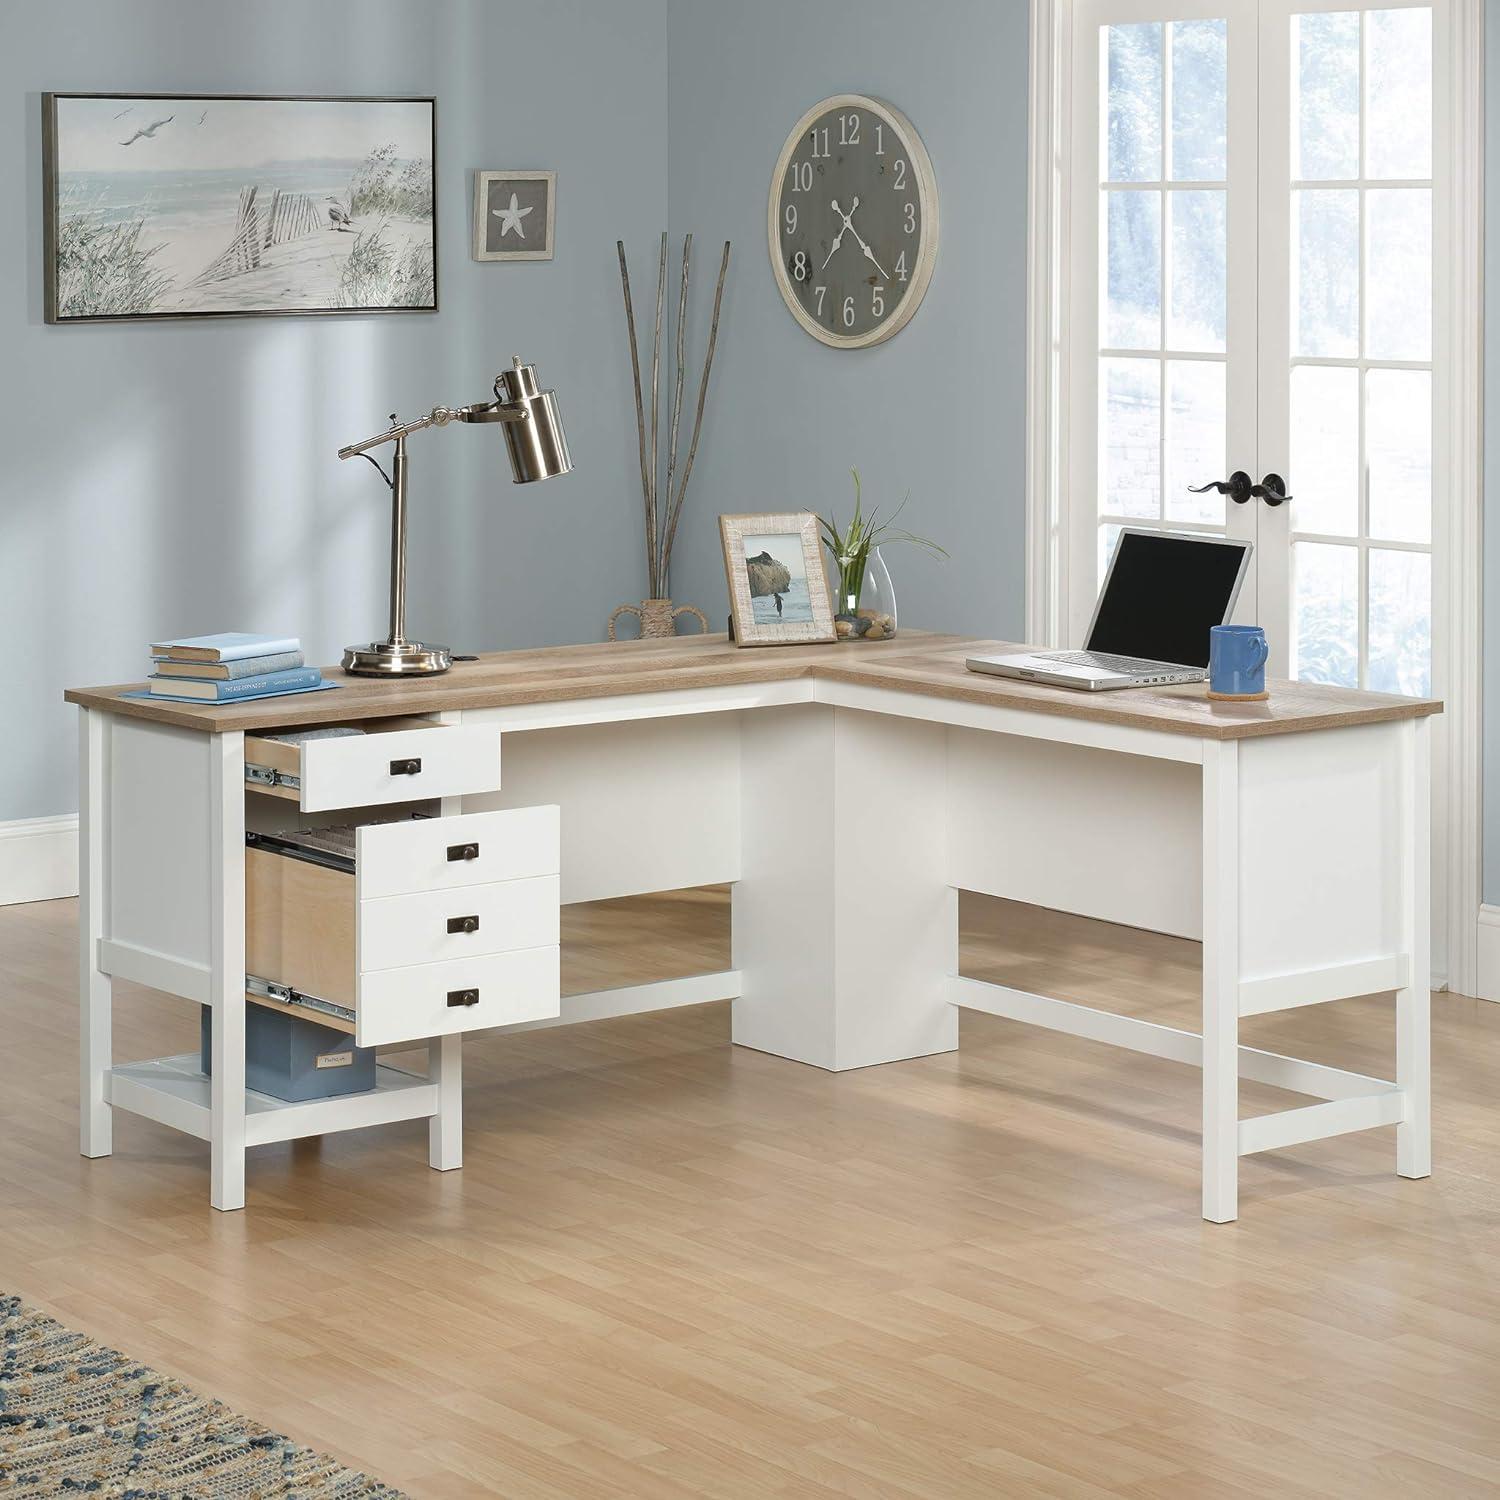 Cottage Corner White Wood Desk with Drawer and Filing Cabinet